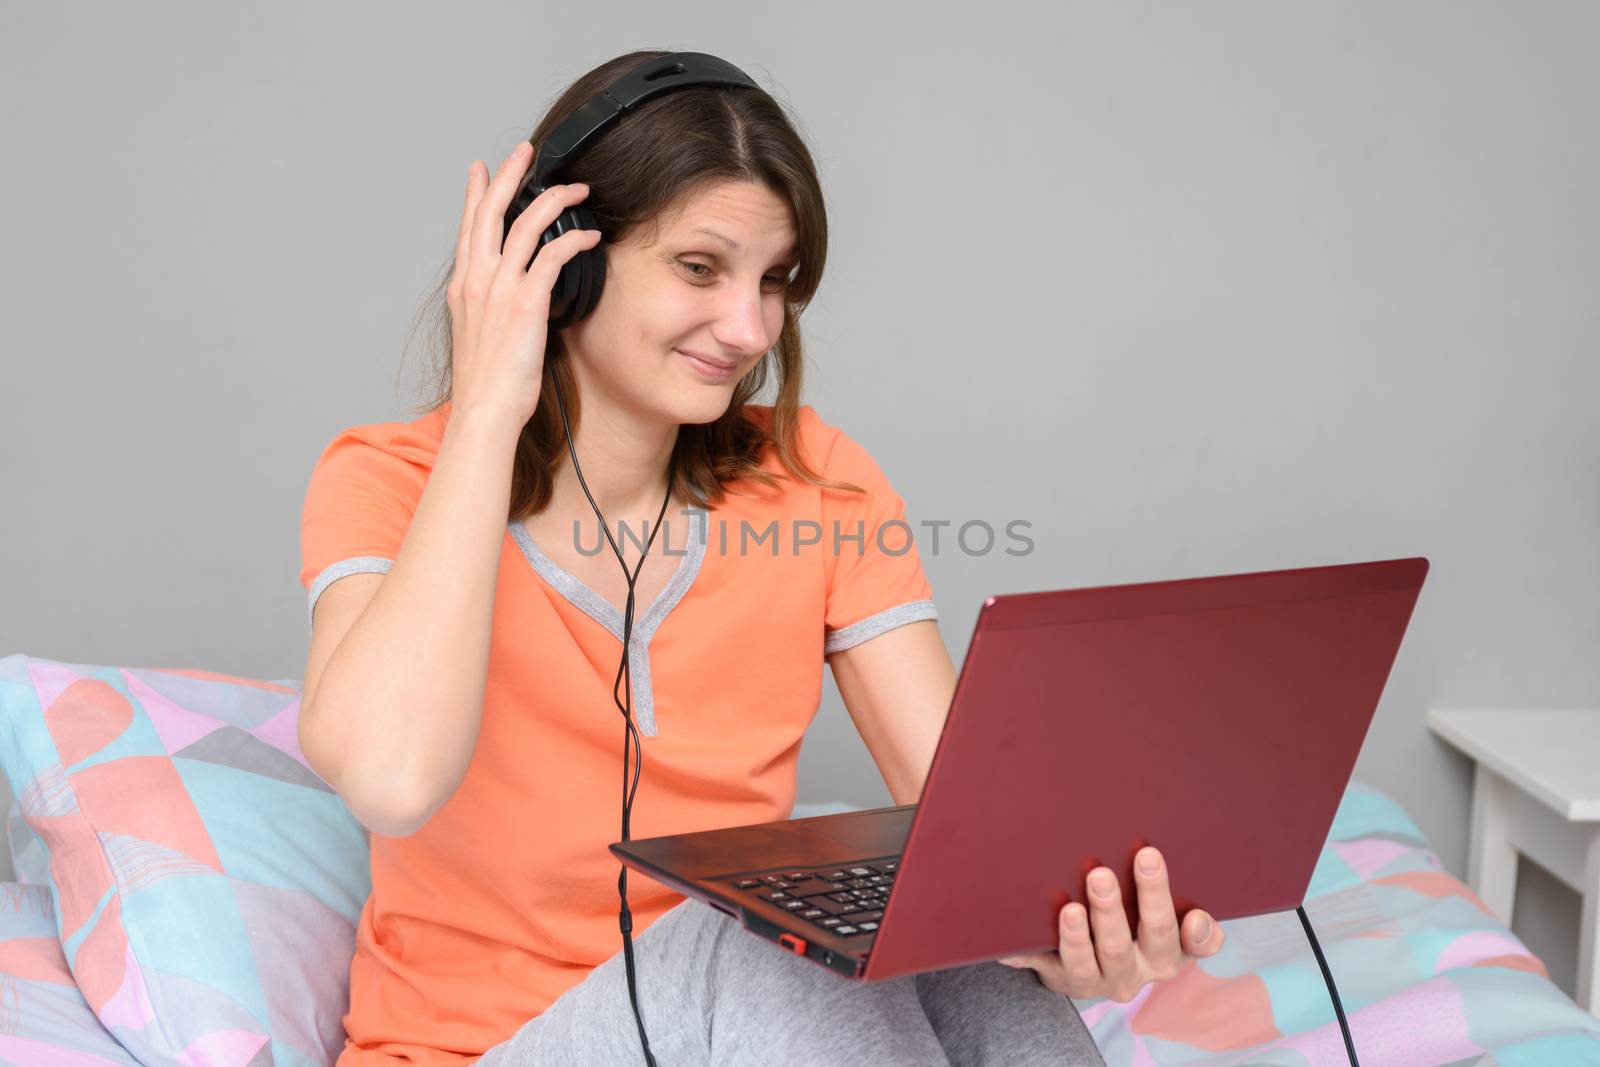 Girl straightens headphones while sitting on bed with laptop by Madhourse